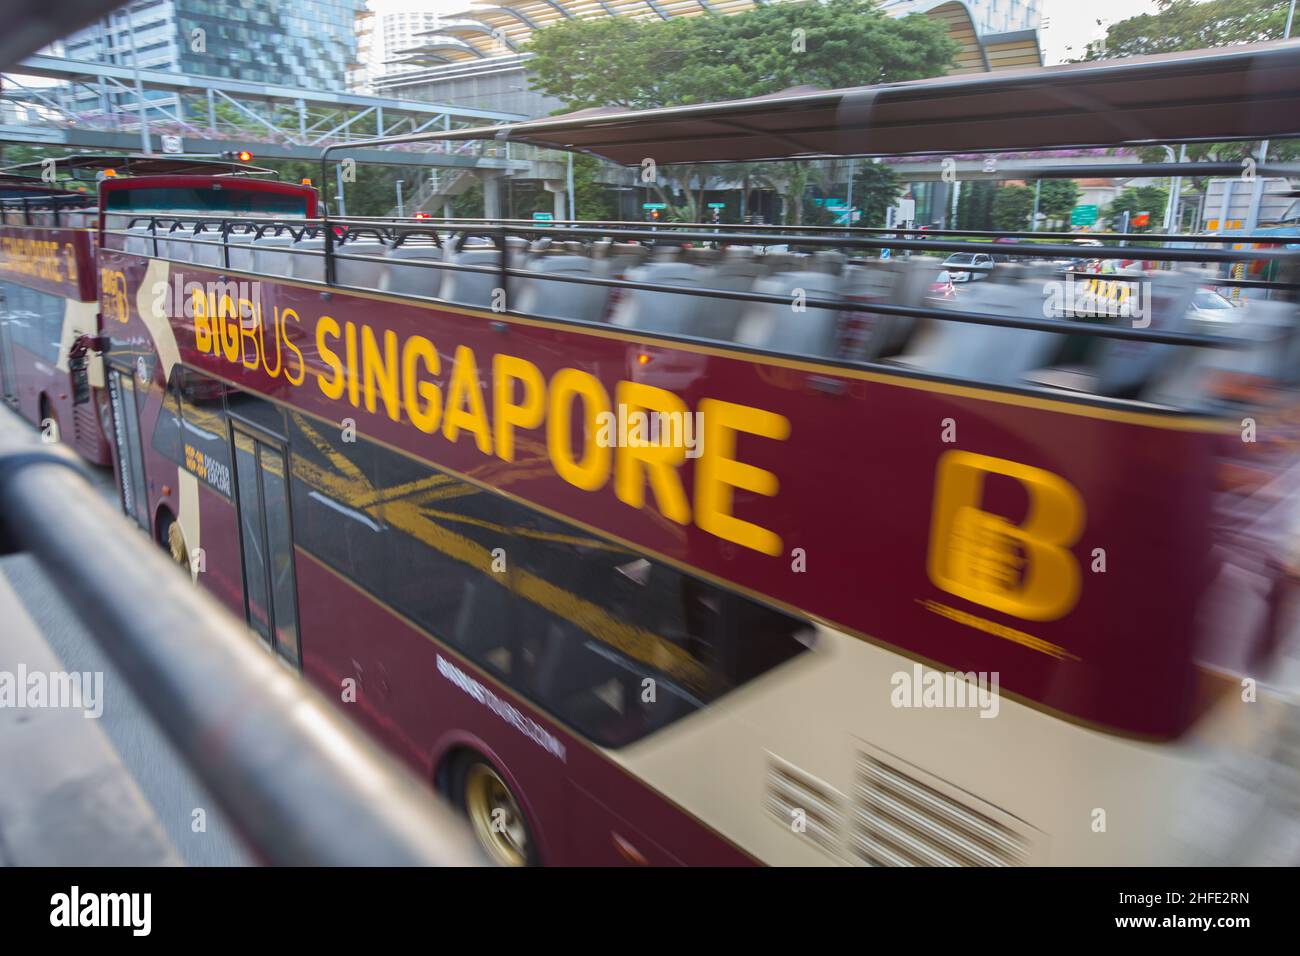 Big Bus Tours is the largest operator of open top bus sightseeing tours founded in May 2011, Singapore is one of the country the company is operating. Stock Photo